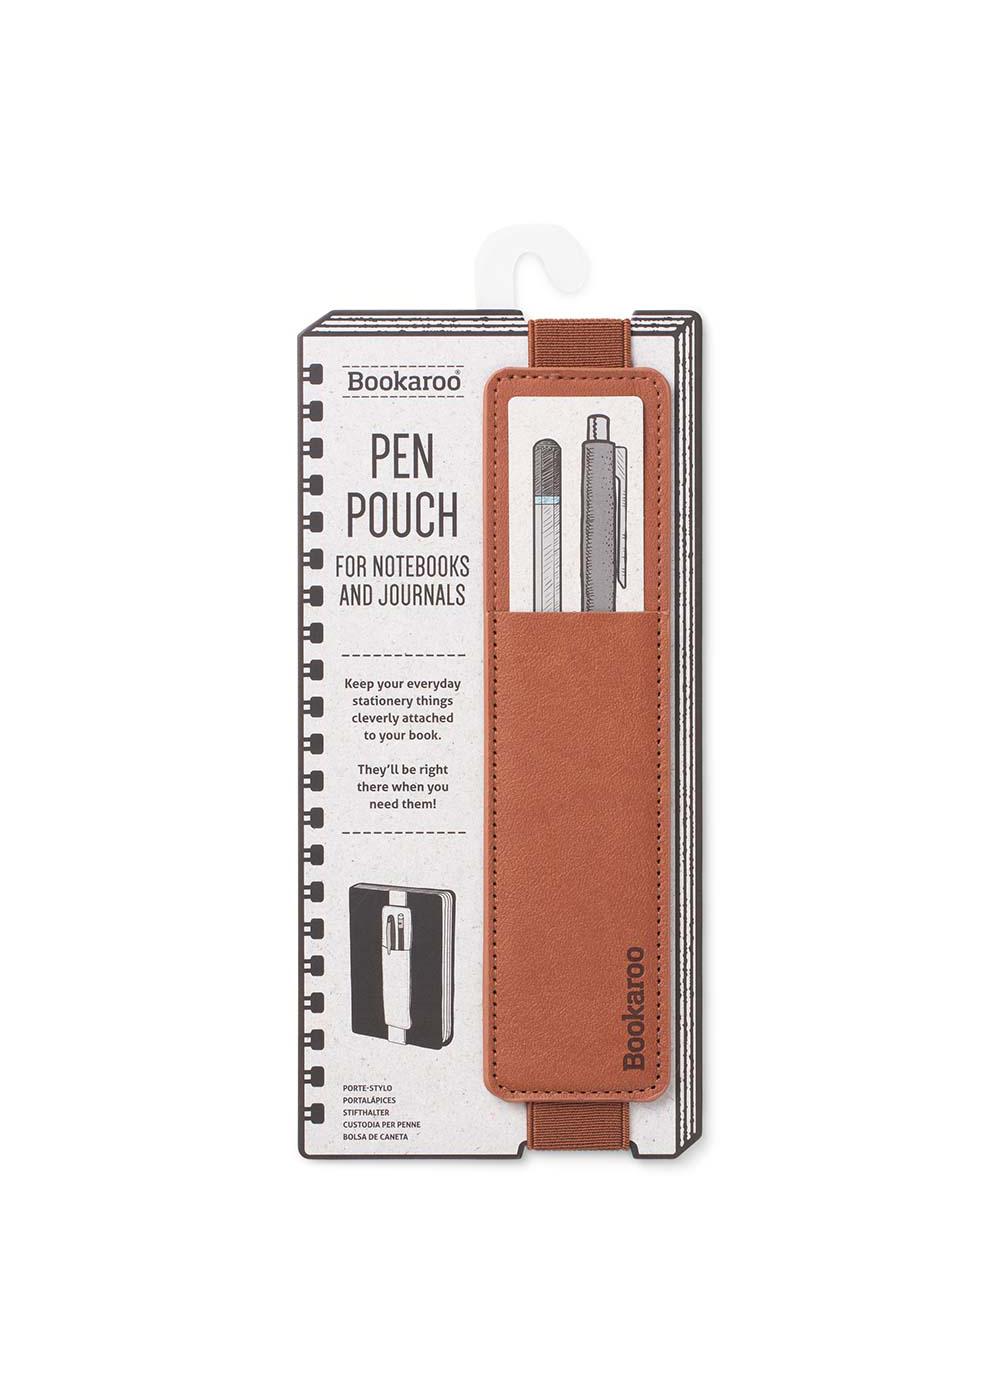 Bookaroo Pen Pouch for Notebooks & Journals – Brown; image 1 of 2